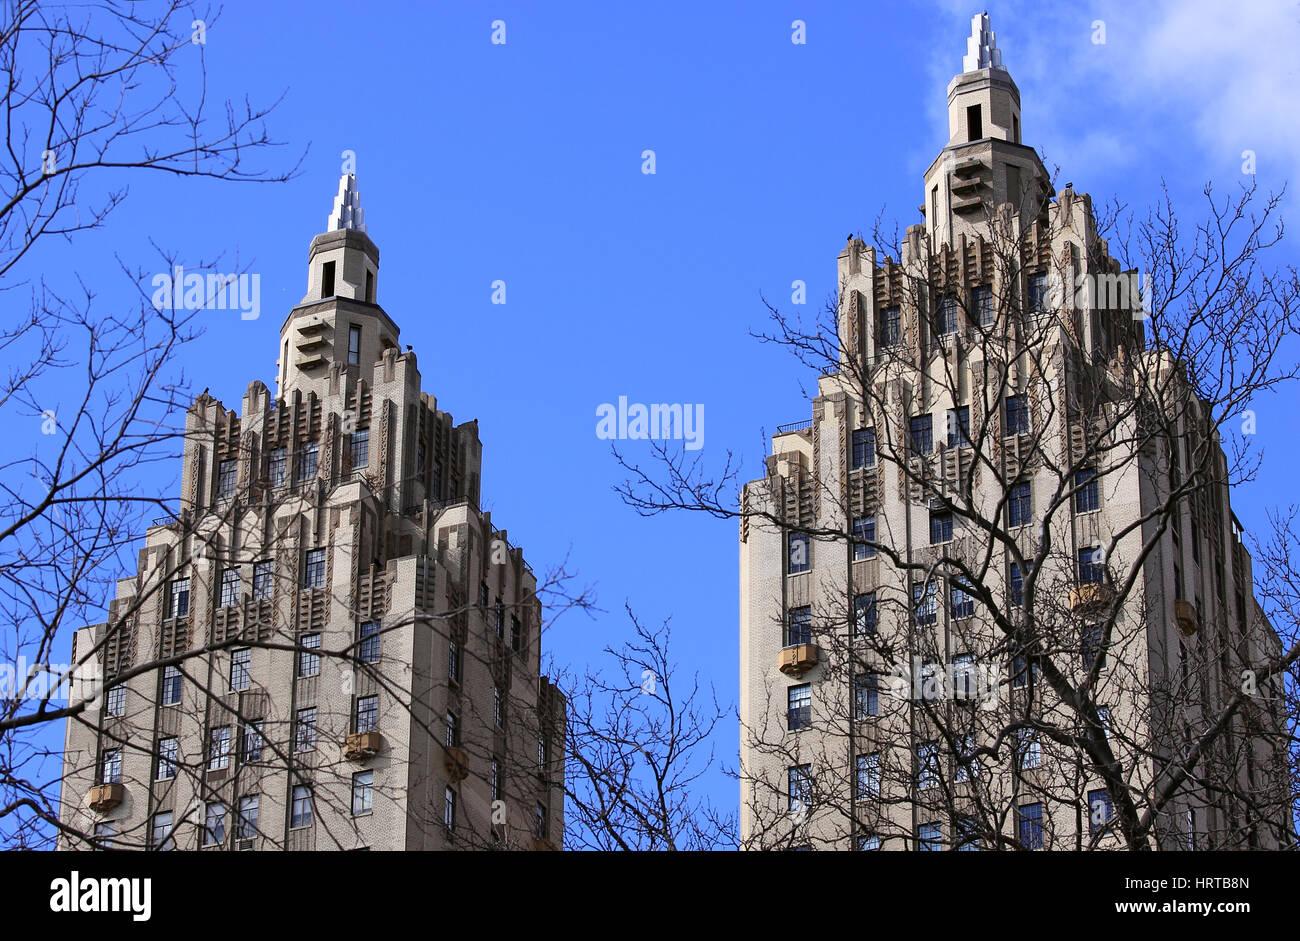 The twin towers of the El Dorado apartment building on Central Park West Manhattan New York City Stock Photo